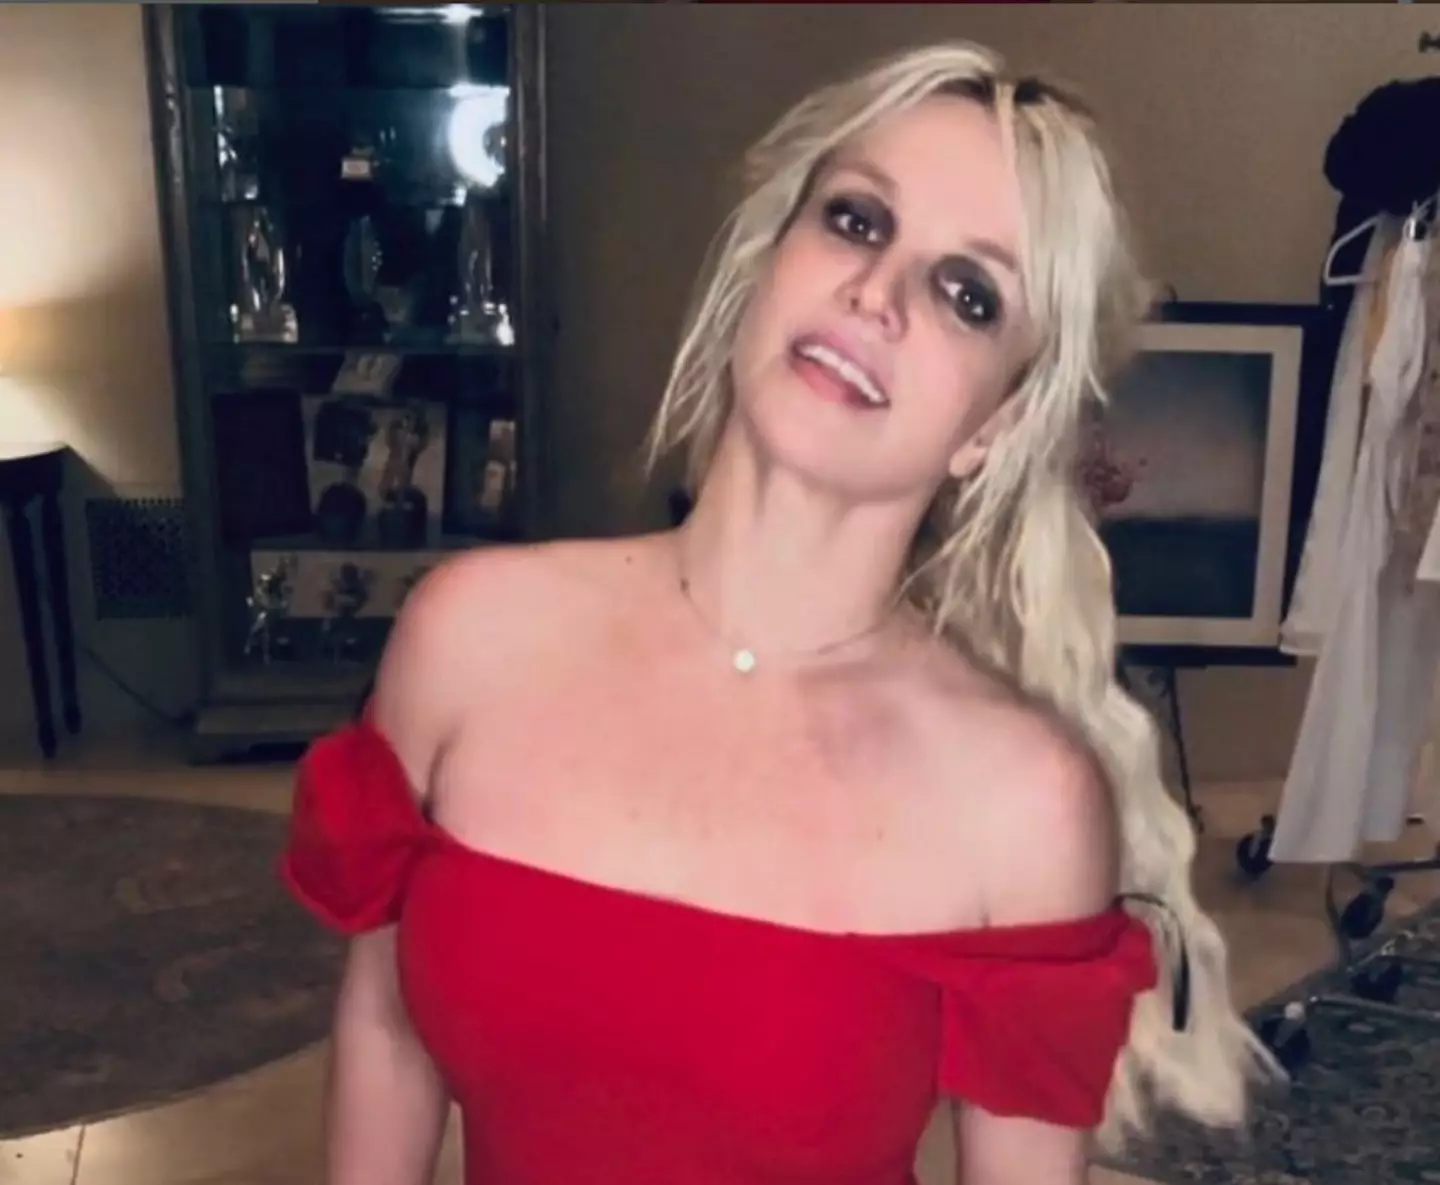 The new TMZ documentary, titled Britney Spears: The Price of Freedom, premiered this week.